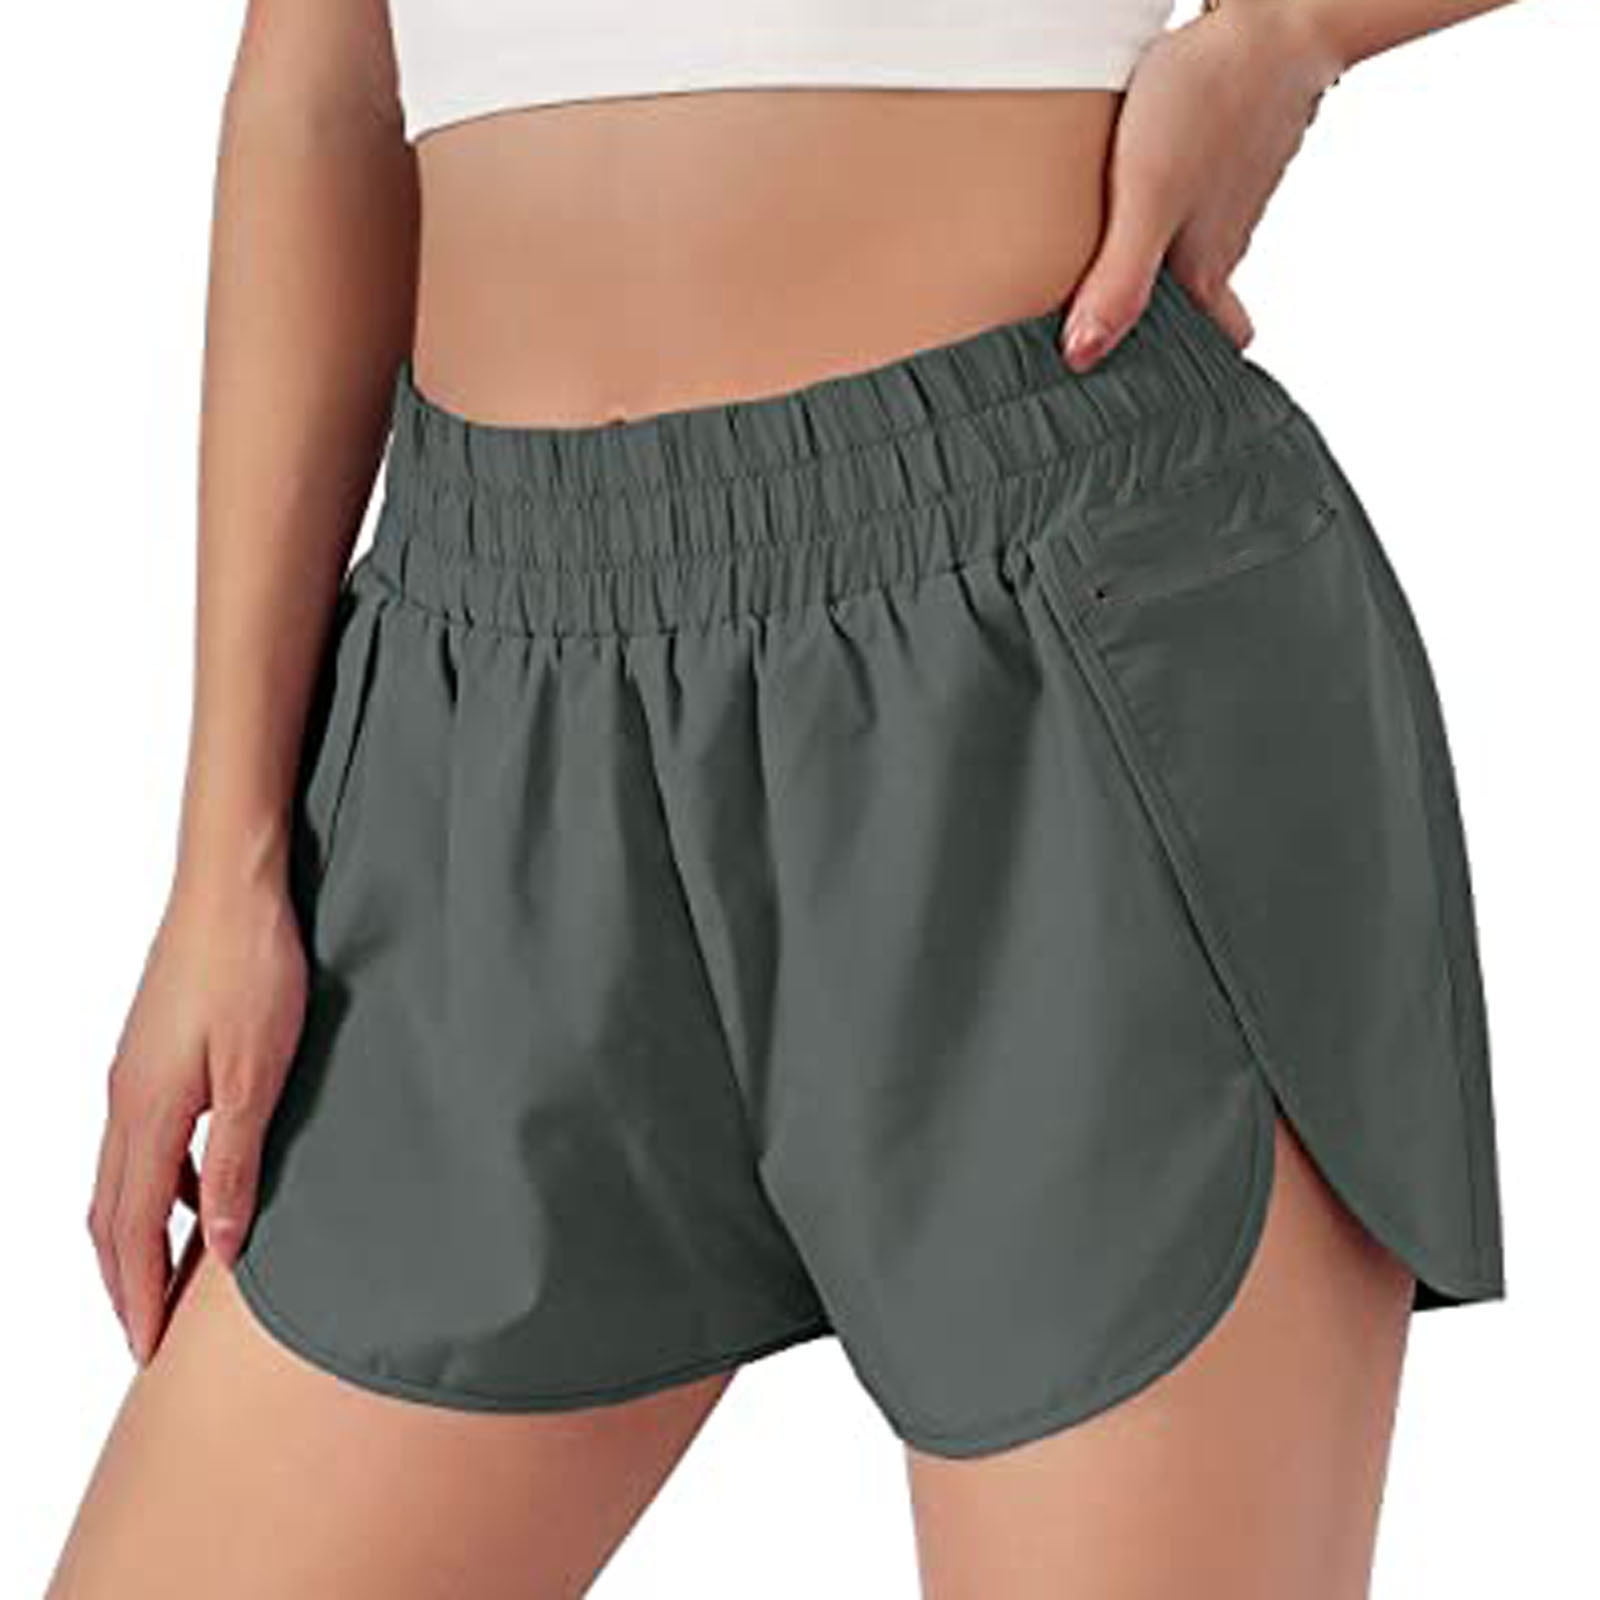 qucoqpe Women's High Waist Out Pocket Yoga Shorts Tummy Control Workout  Shorts Running Athletic Non See-Through Active Shorts on Clearance -  Walmart.com